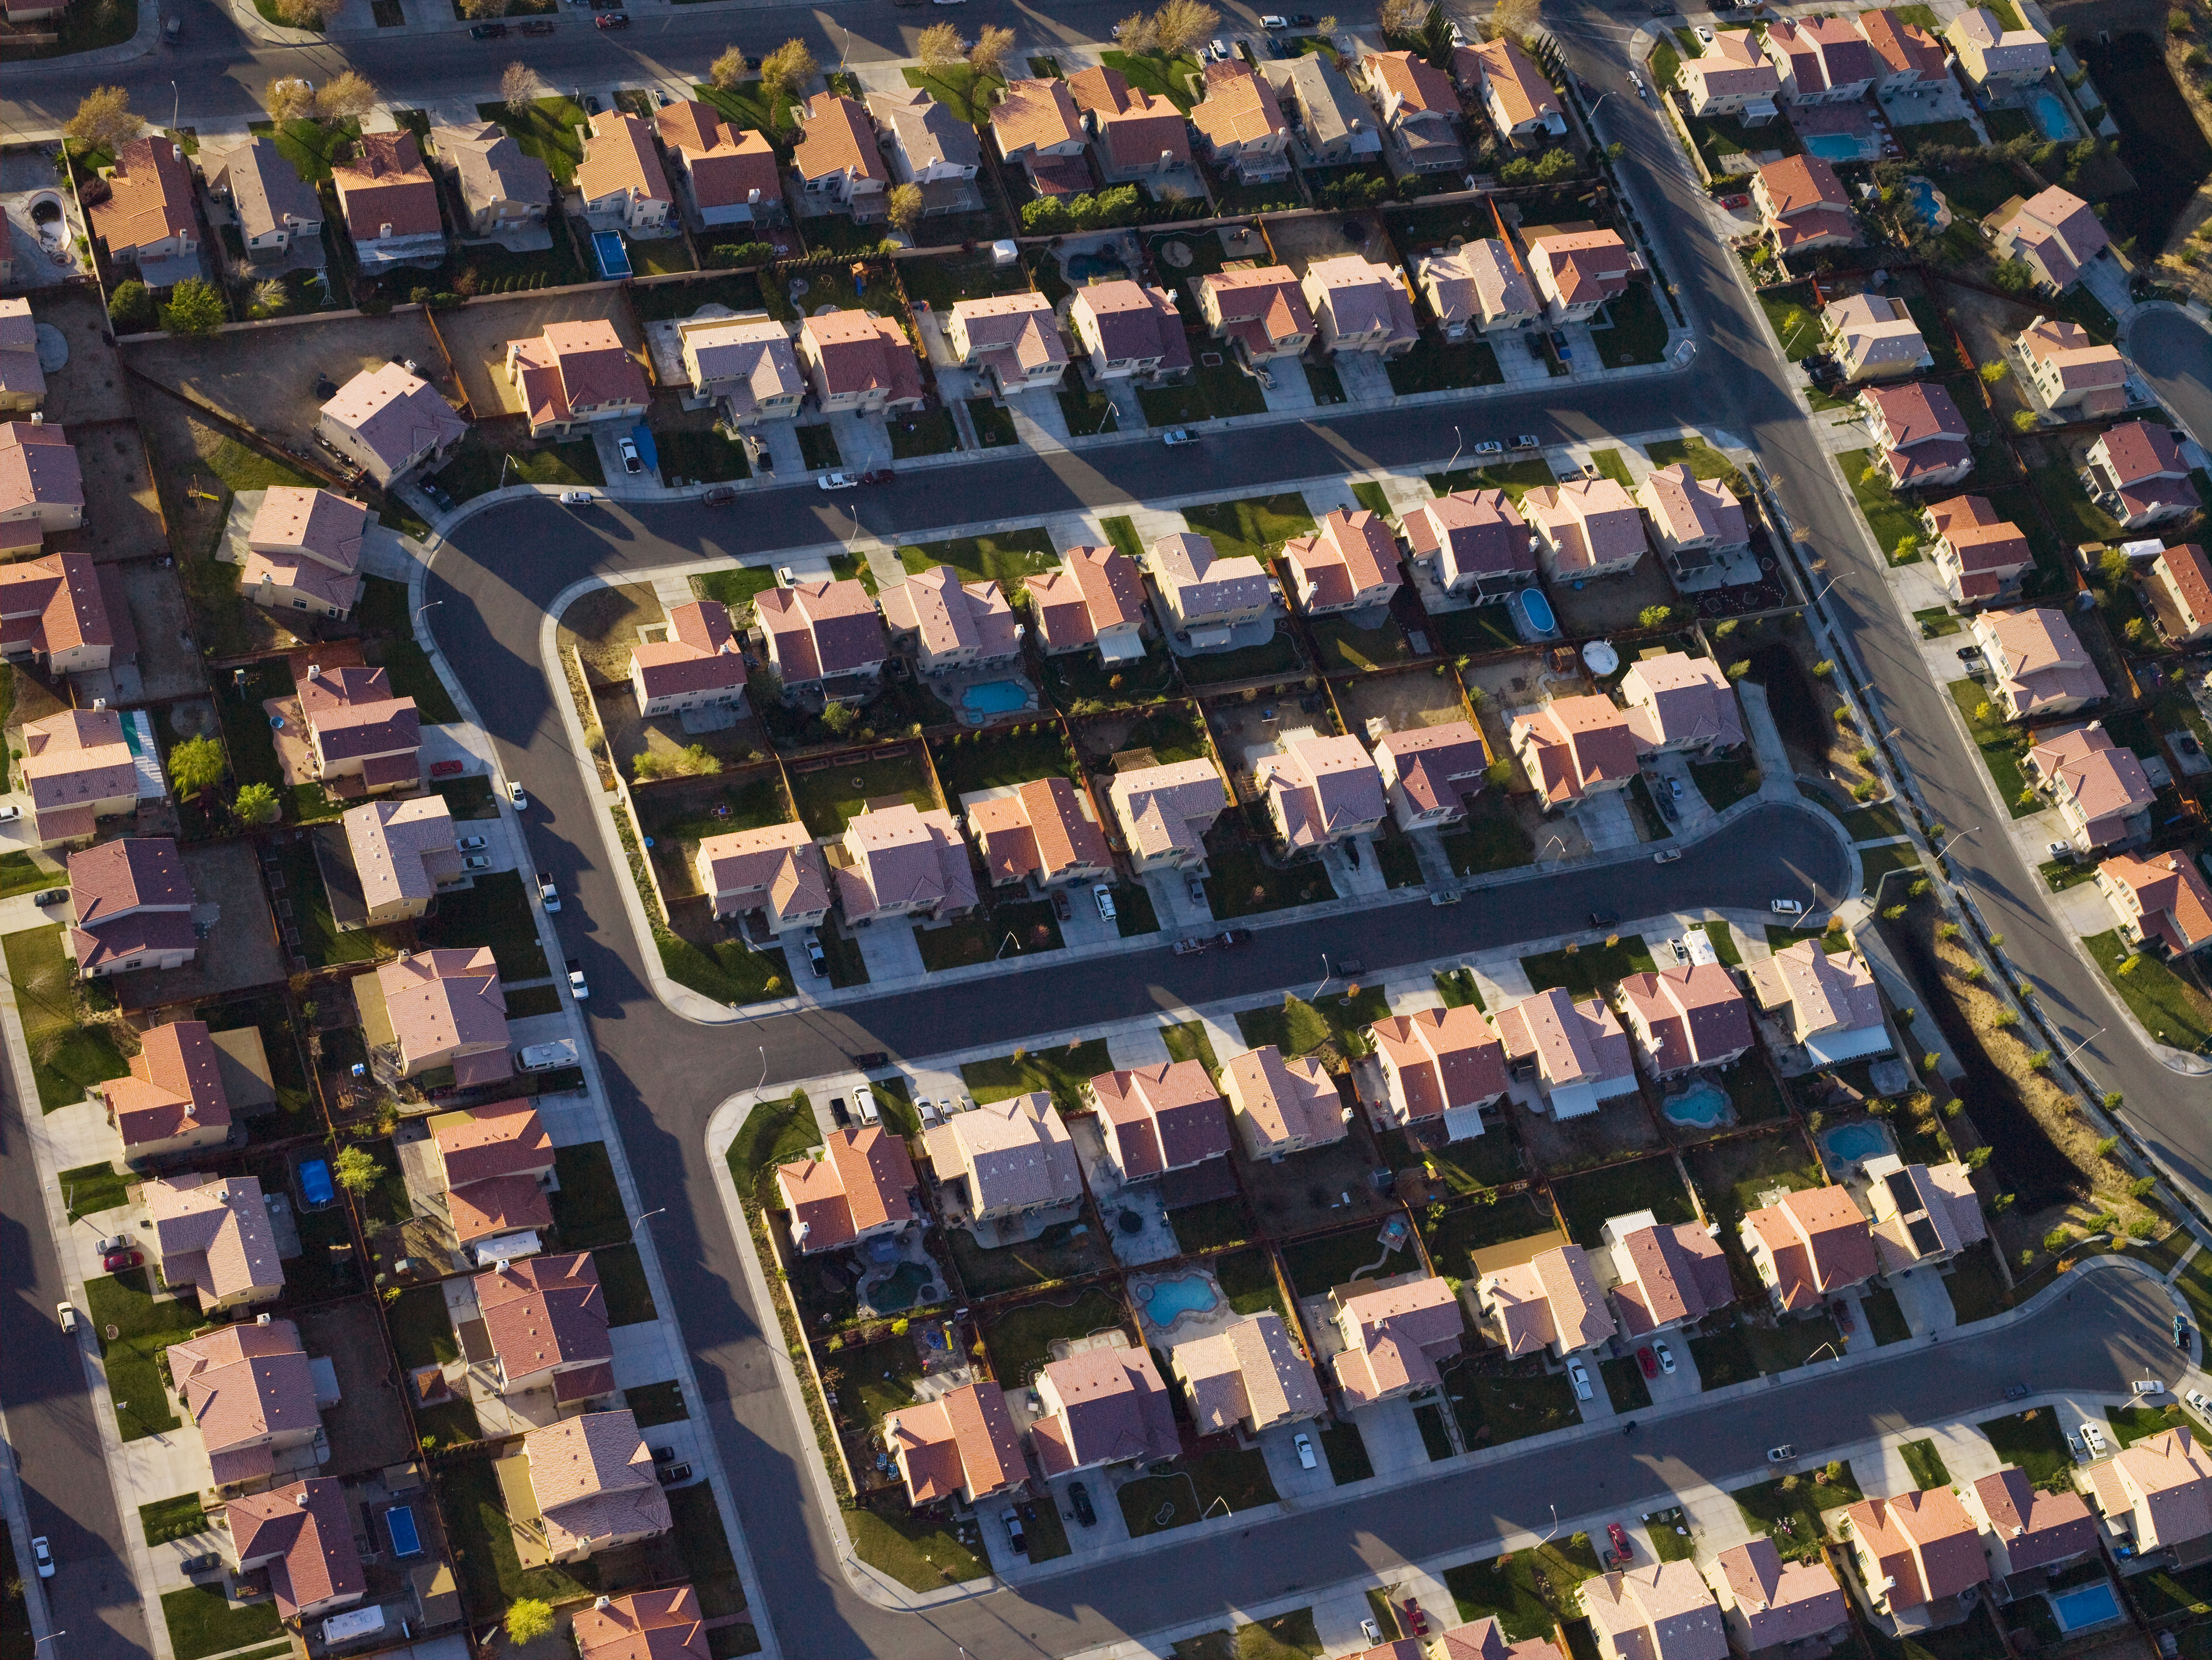 Aerial view of a suburban neighborhood with uniform houses